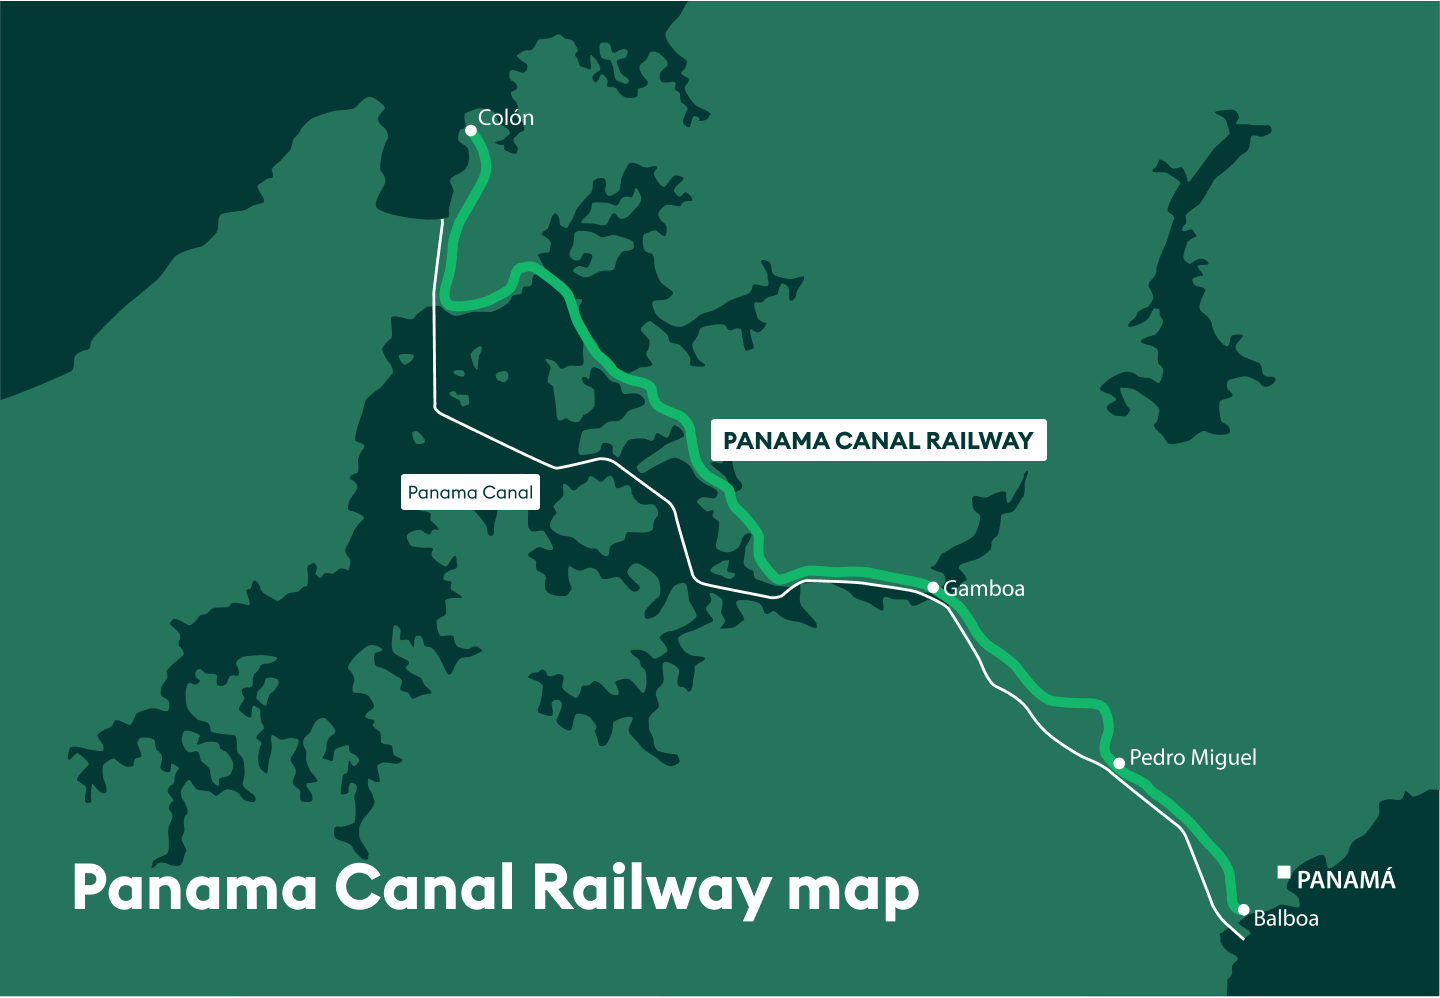 Panama Canal Railway: Container alternative to Panama Canal